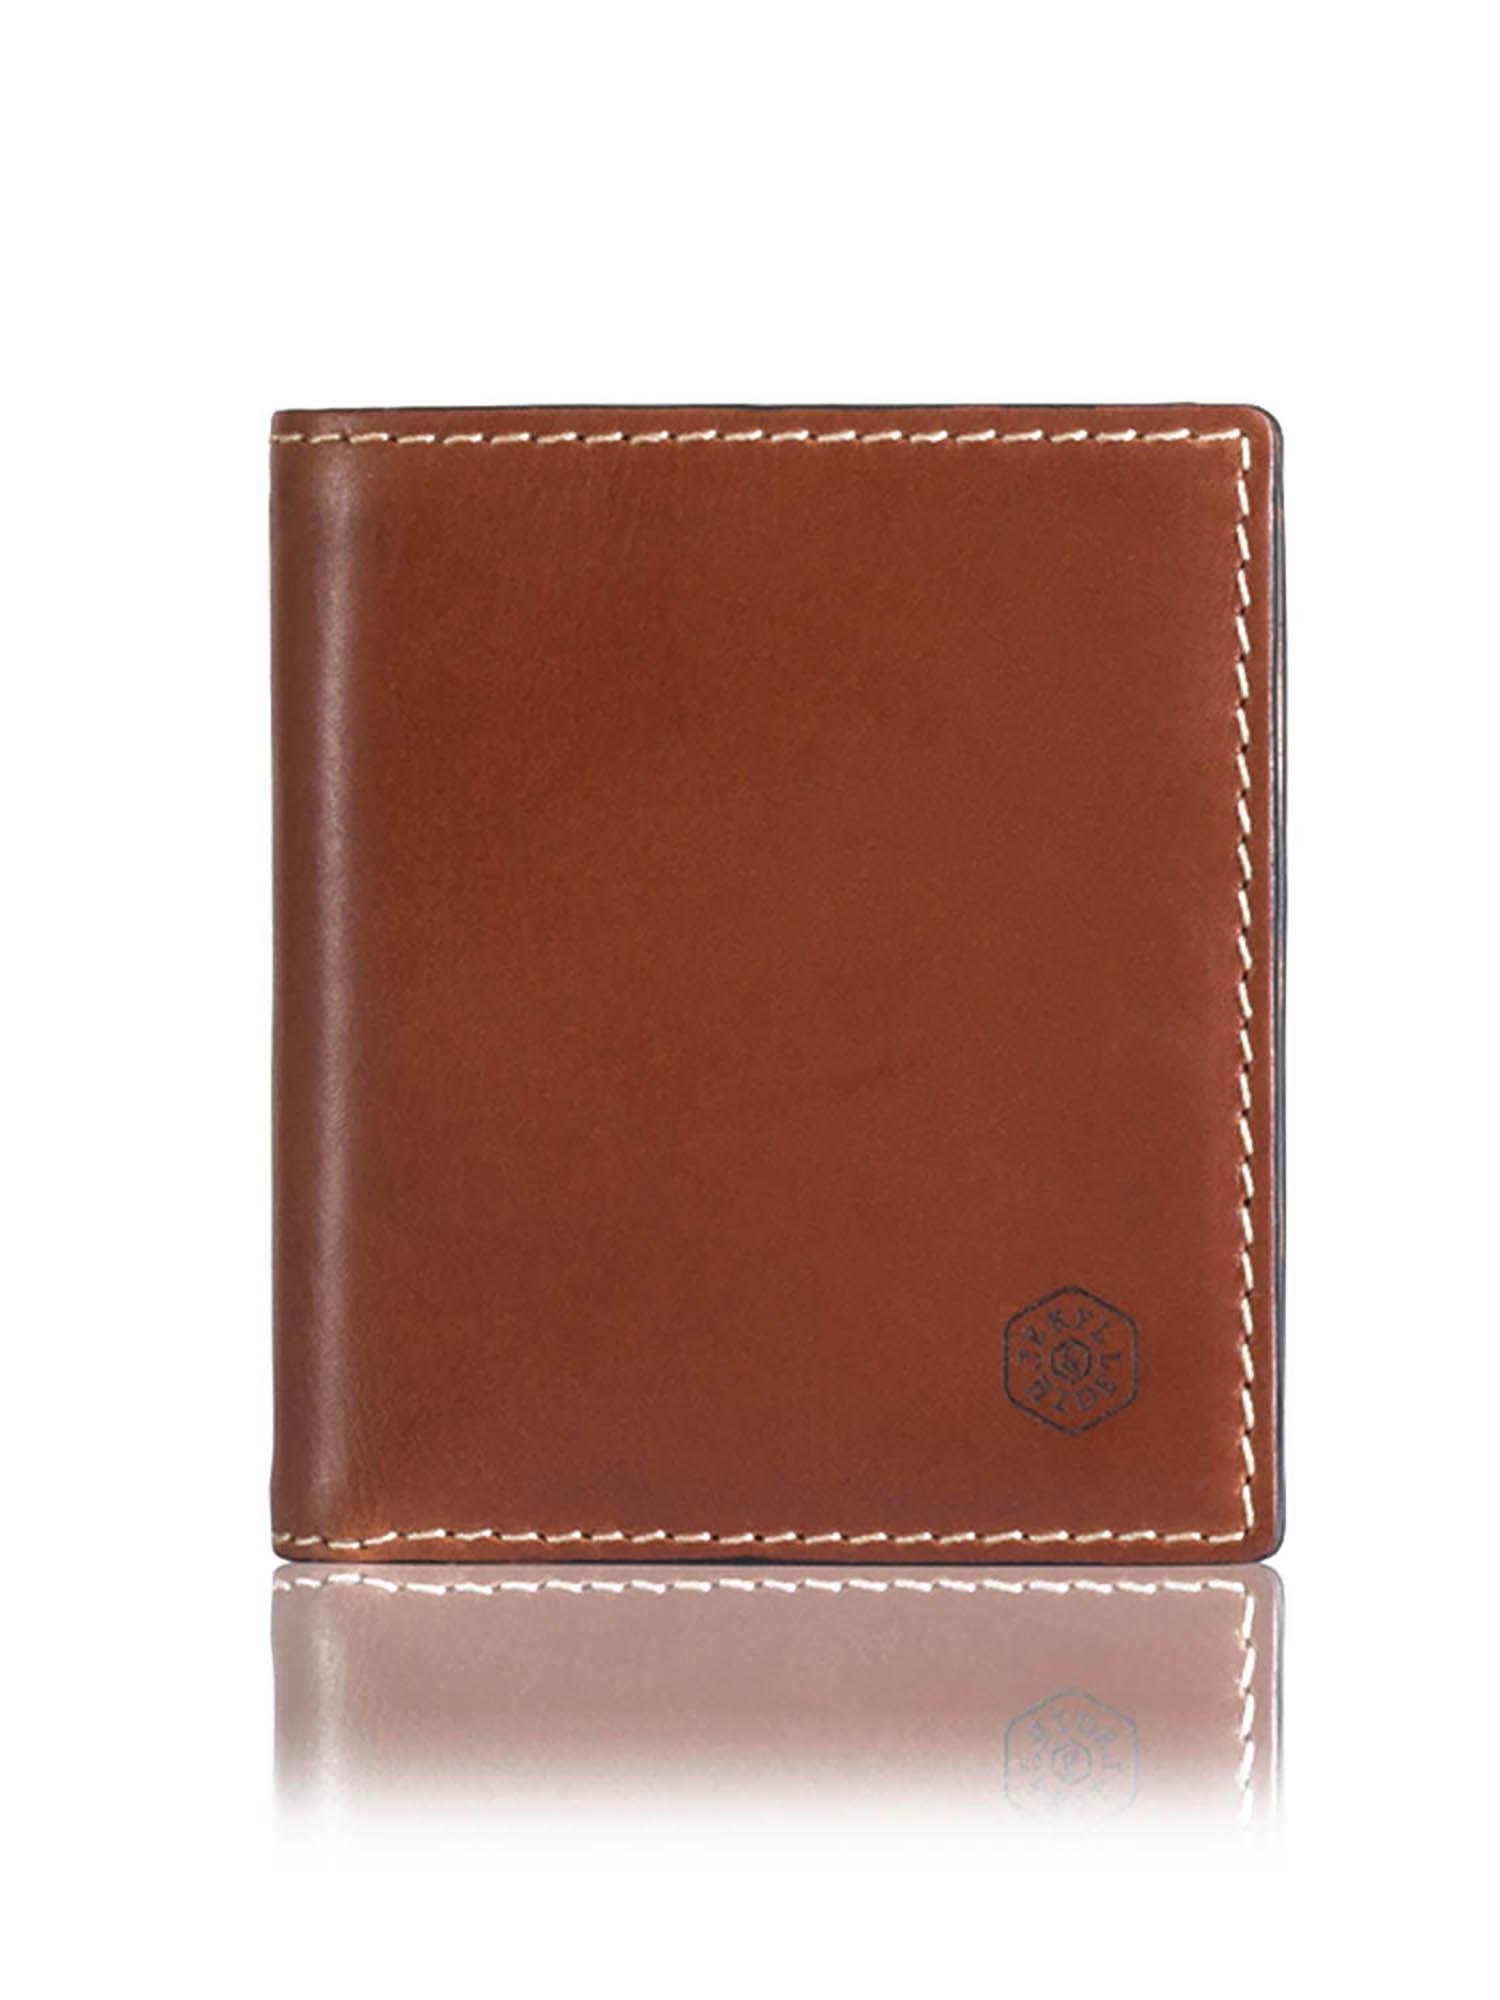 clay texas slim bifold wallet with coin pouch